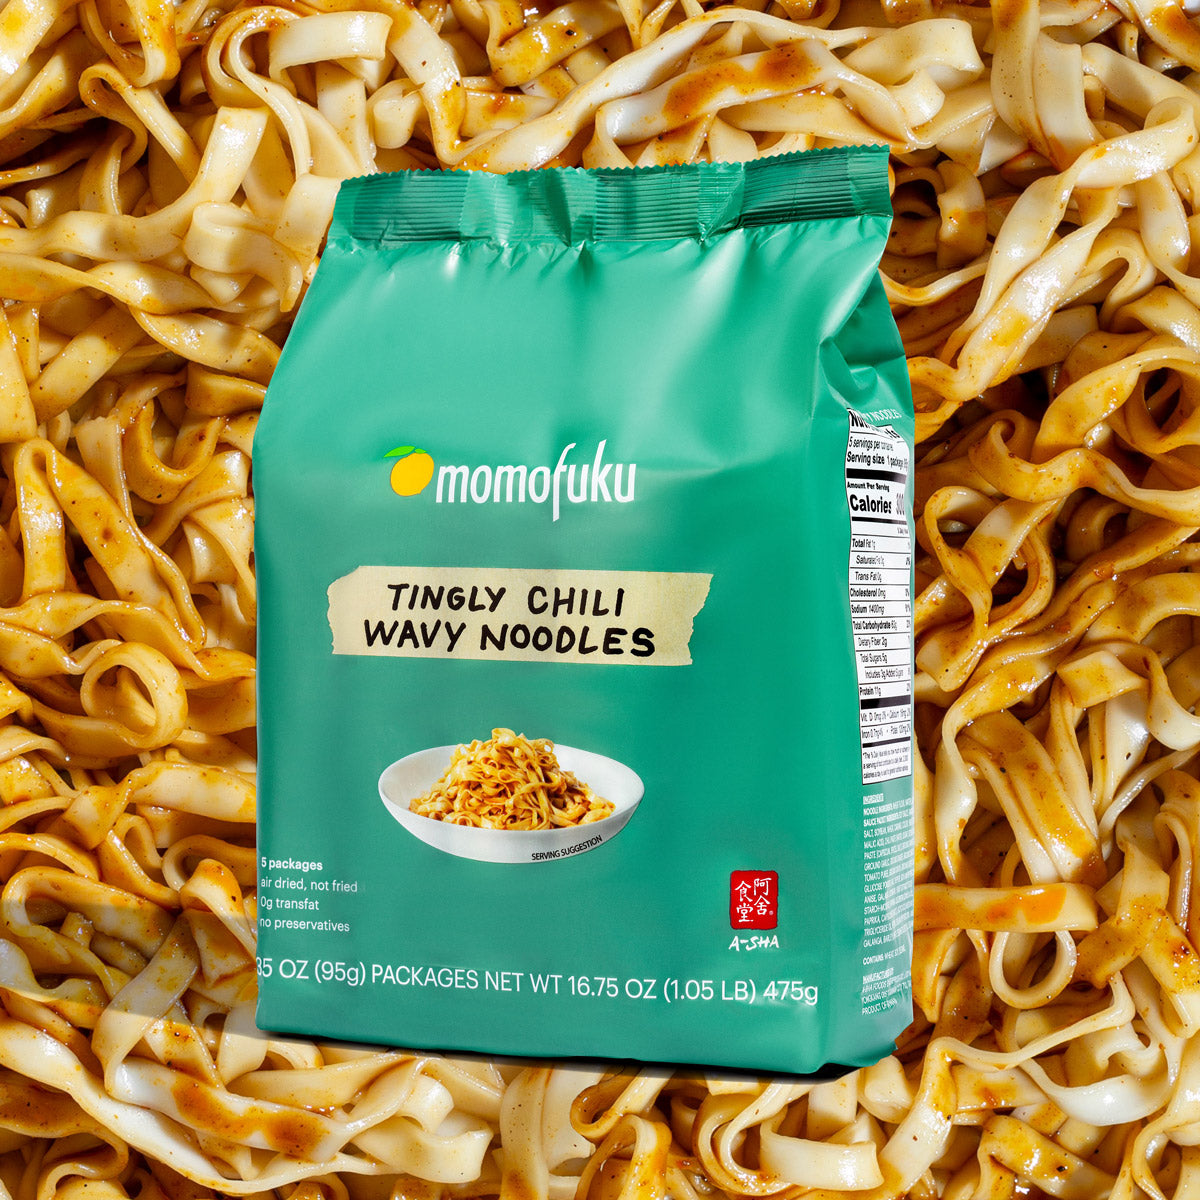 5 pack of Tingly Chili Wavy Noodles